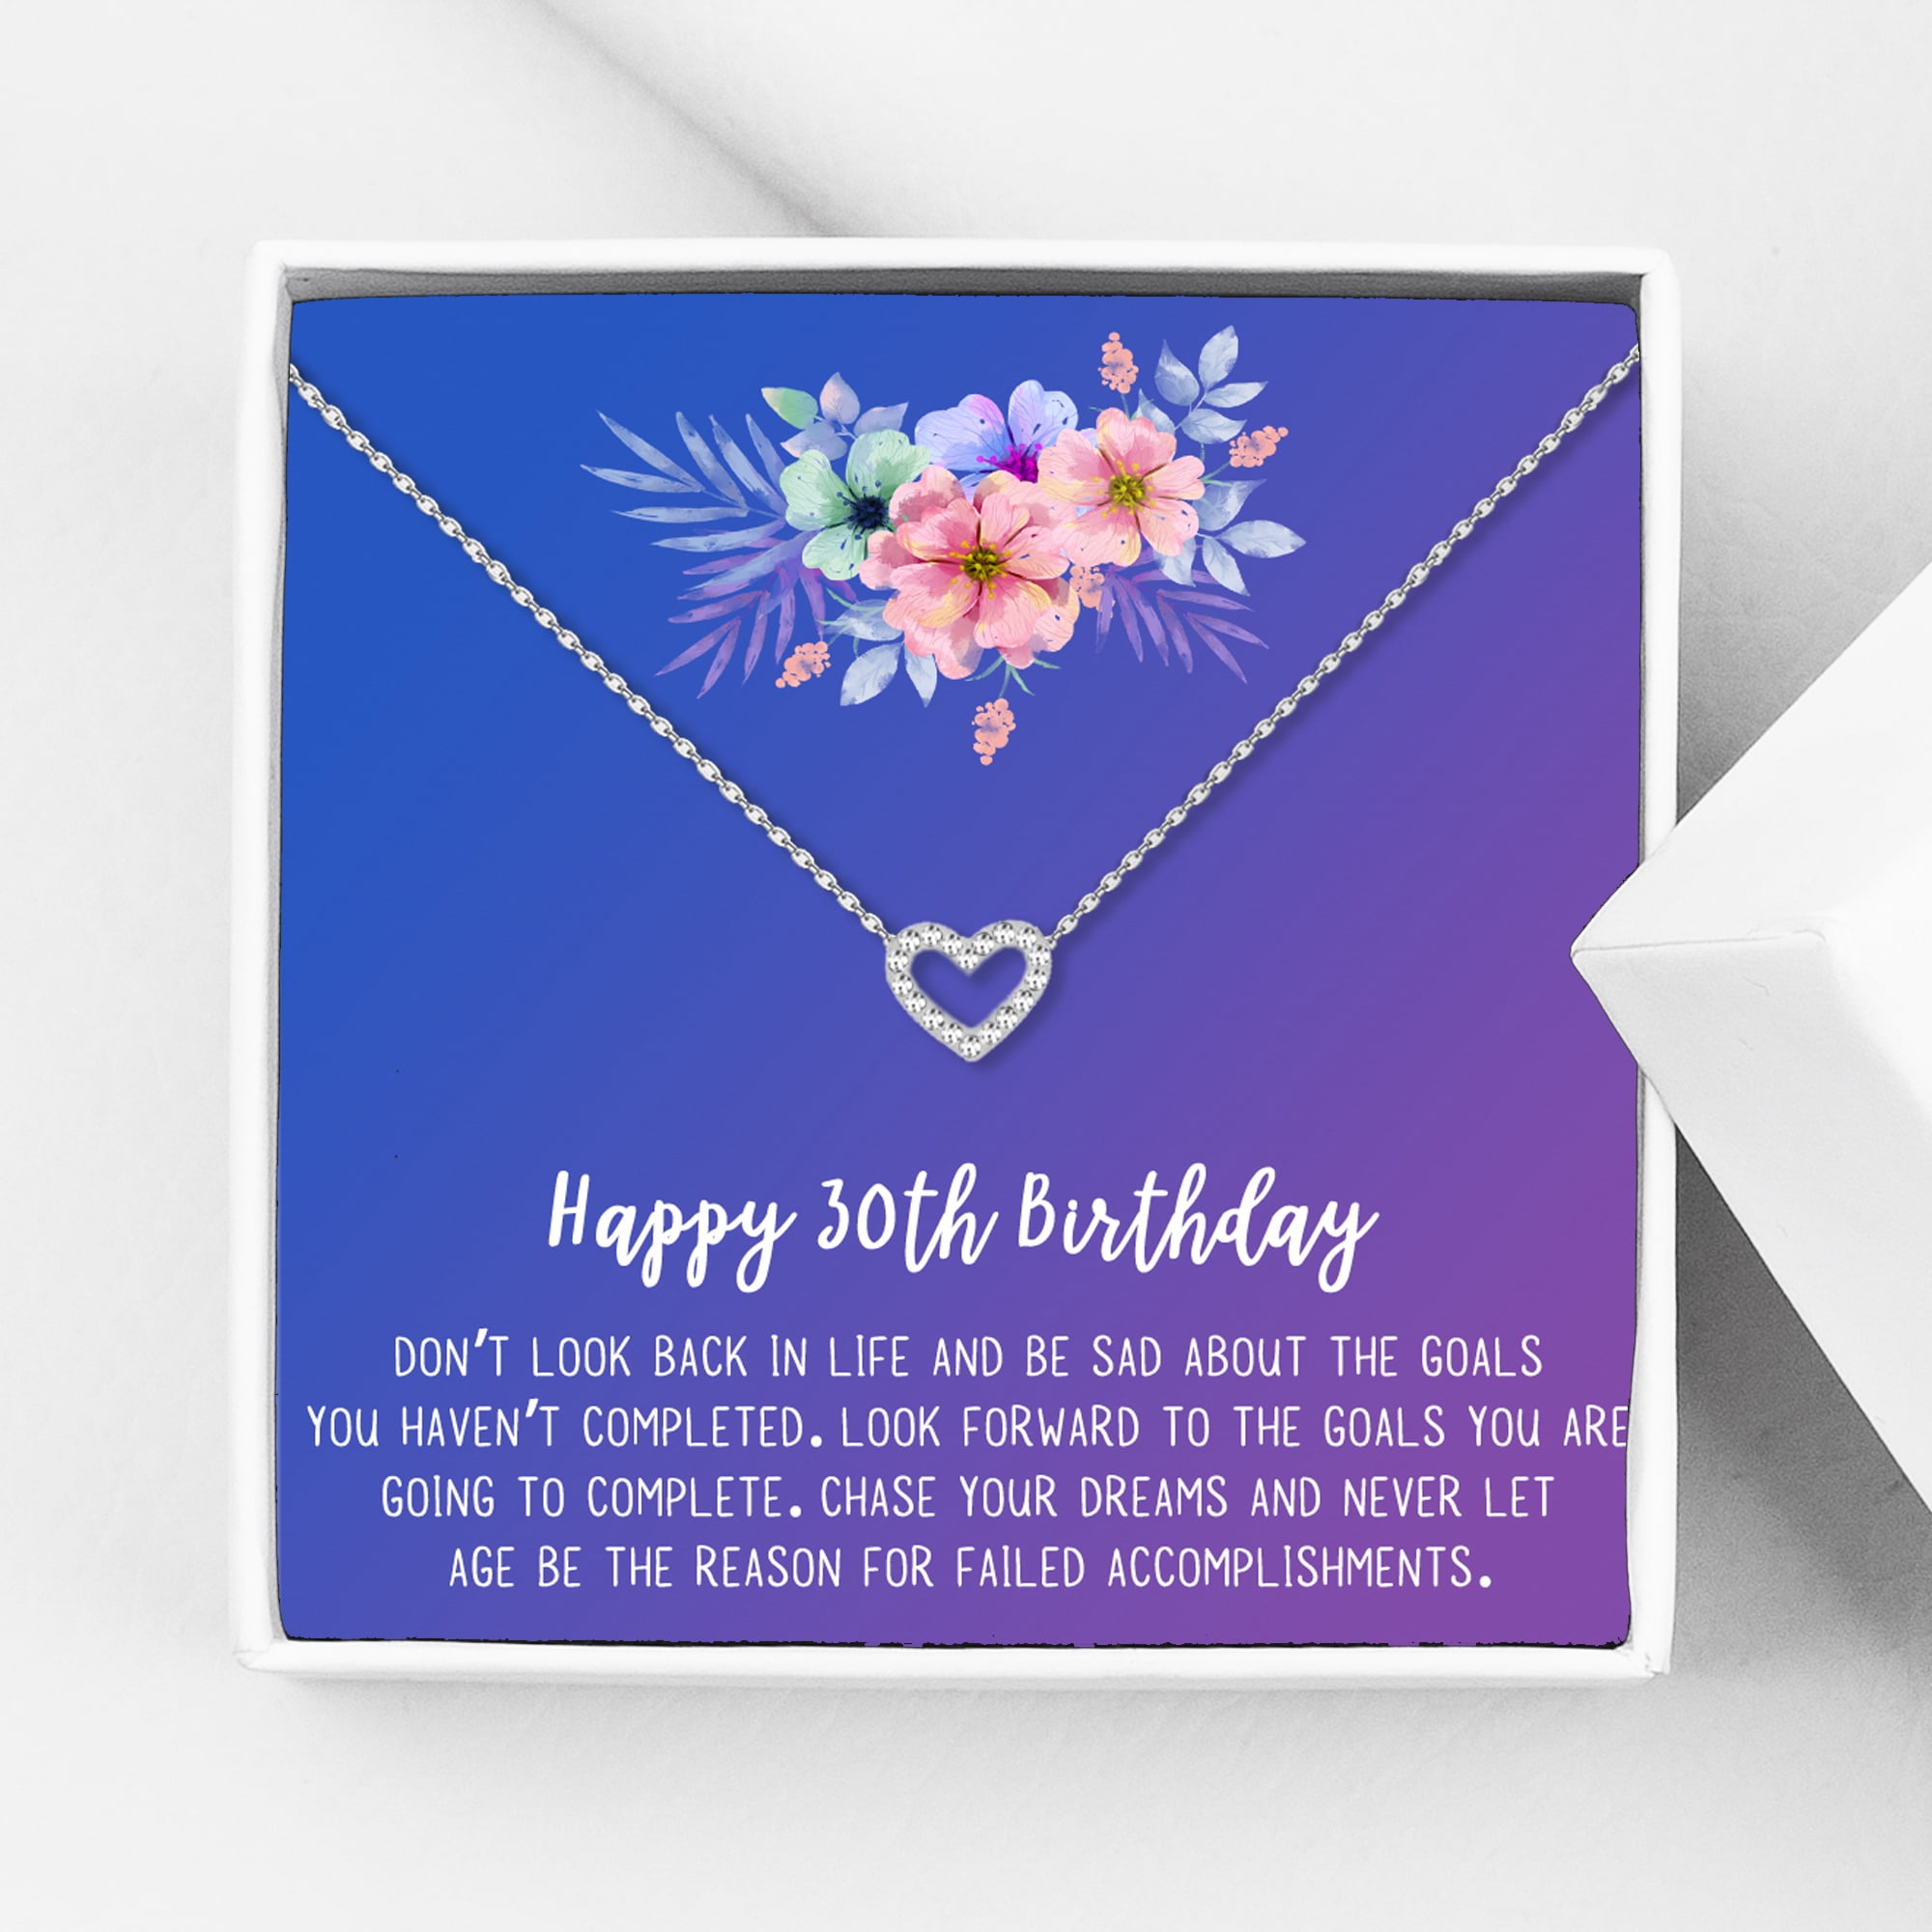 Details about   Personalised Love You Uncle Gift Birthday Christmas Thank You Present Him 